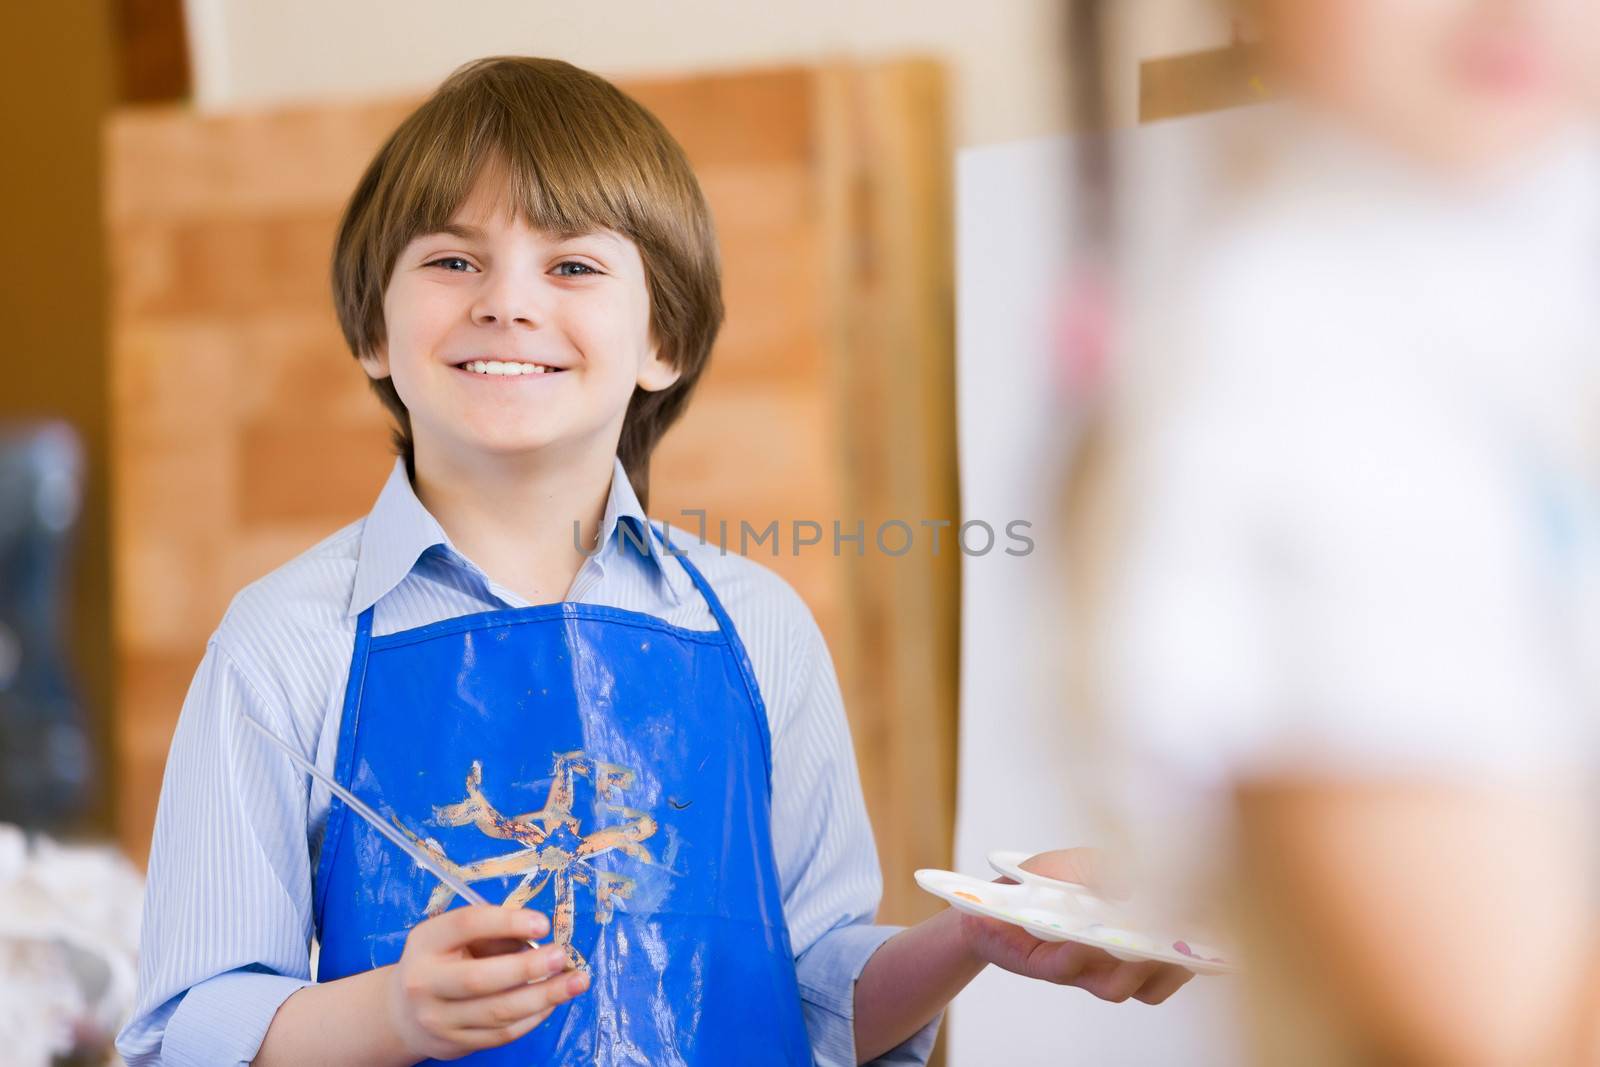 Image of little cute boy painting pictures at kindergarten